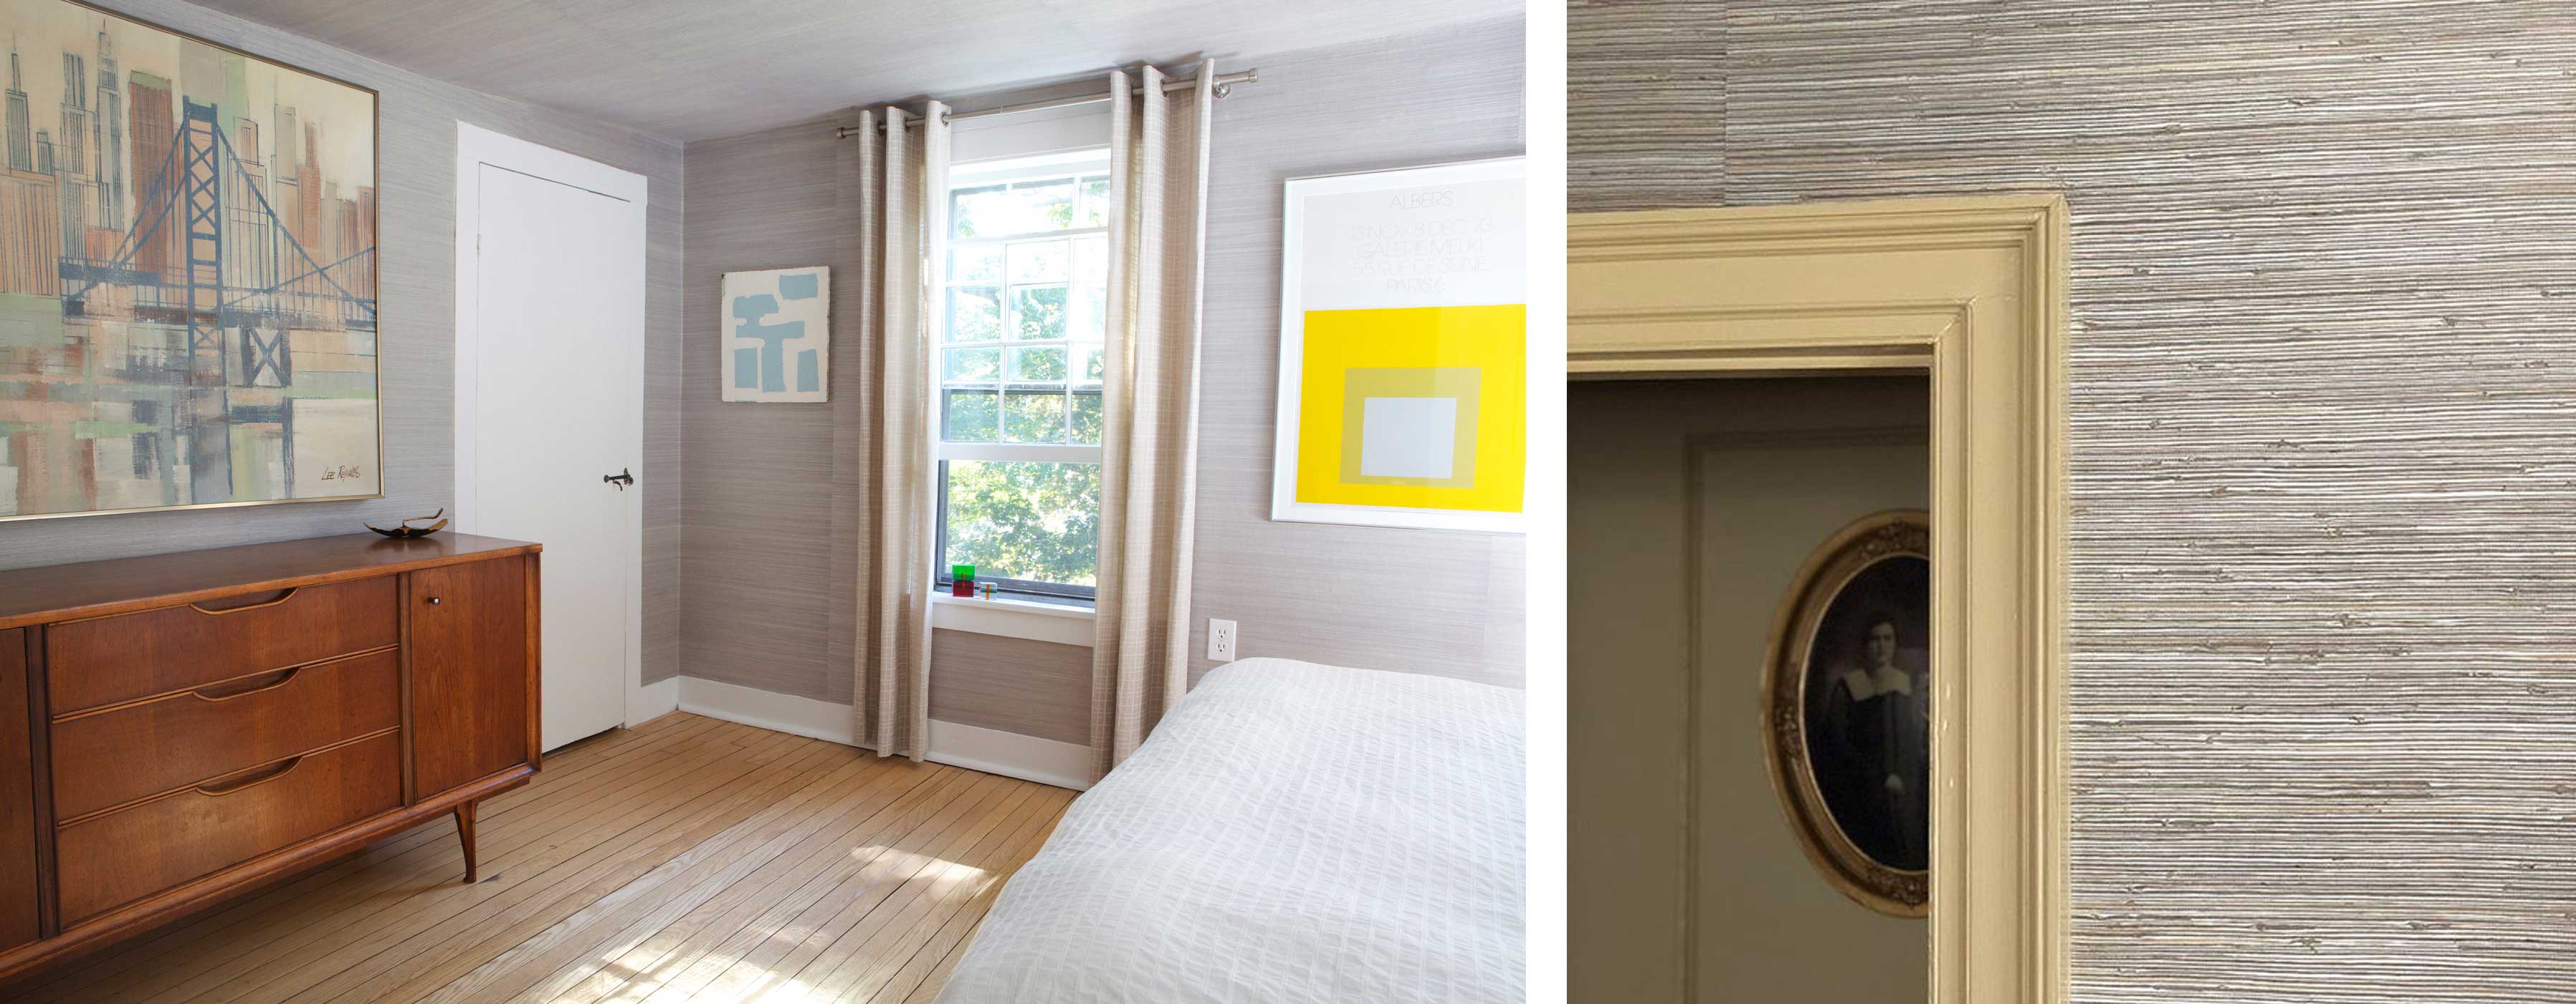 Side by side images, one is of a traditional bedroom with gray grasscloth wallpaper and the other is a close up of a corner of a frame against chunky wallpaper